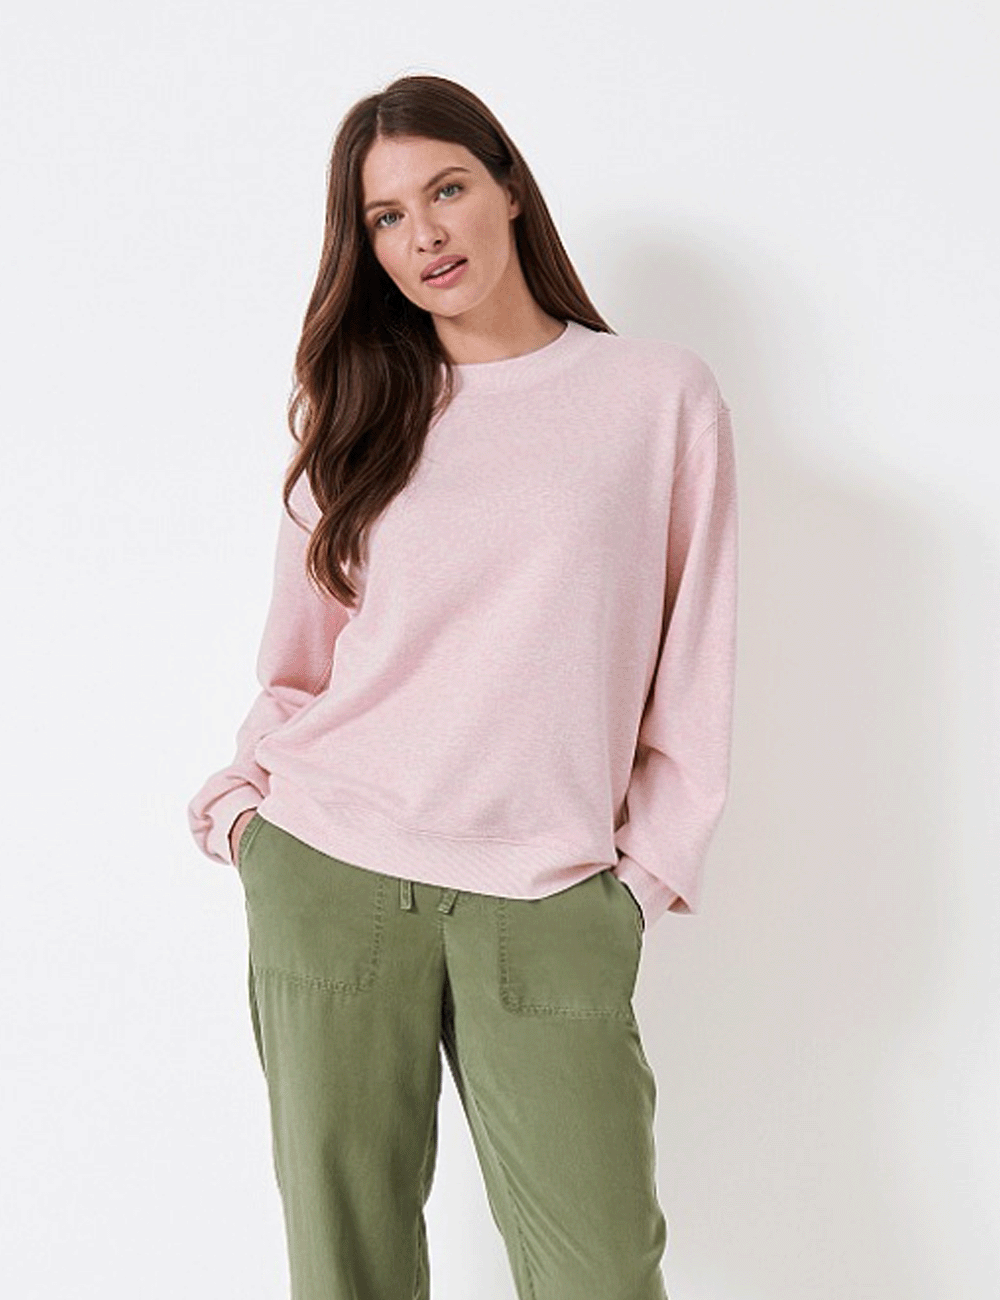 Woman wearing the Crew Clothing Essential Oversized Sweatshirt with khaki trousers